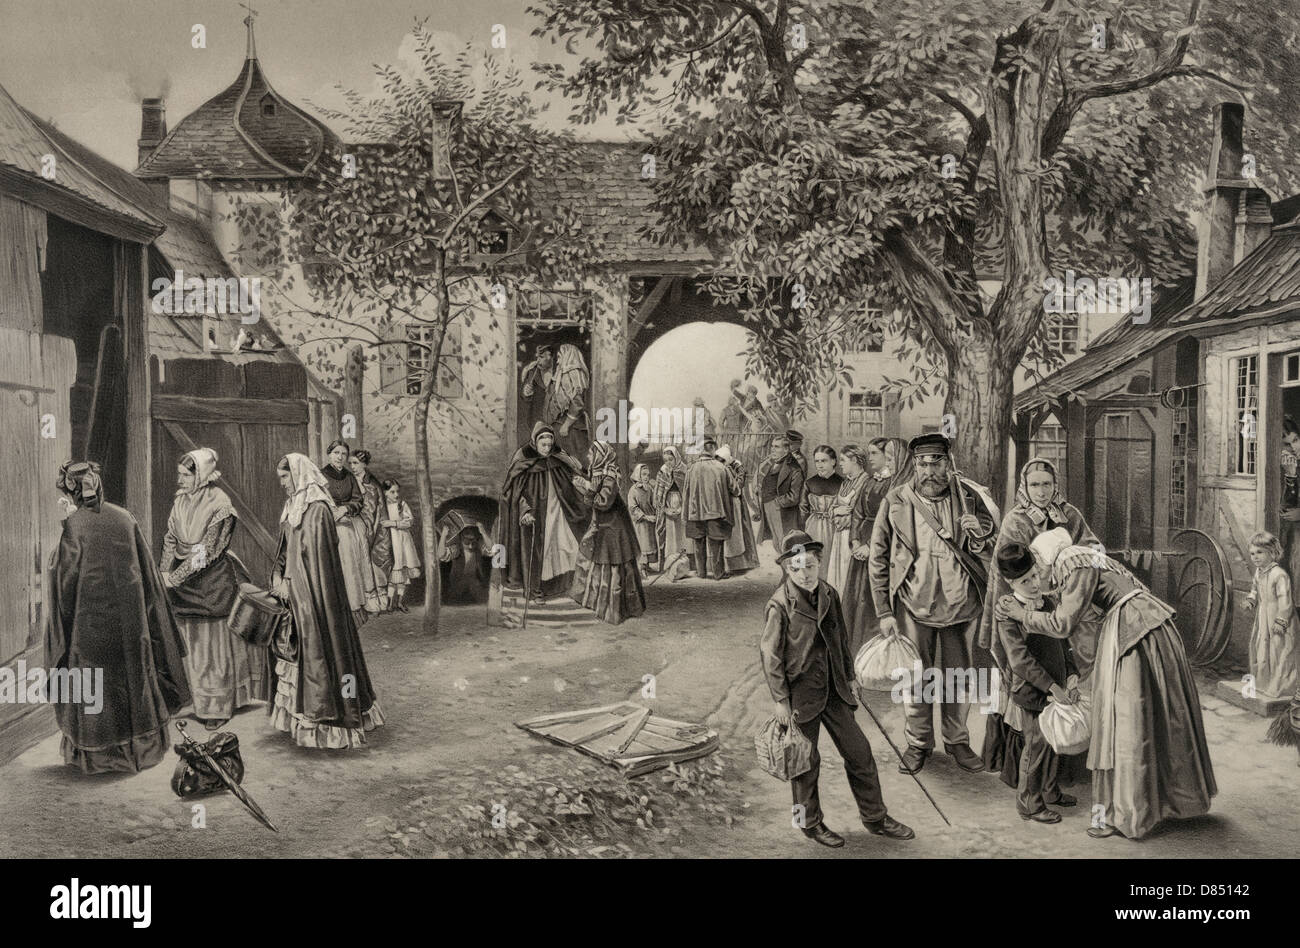 The emigrants farewell Abschied der auswanderer / groups of emigrants in a small town square, taking leave of loved-ones, friends, and neighbors, before passing beneath an arched entryway where wagons are waiting to take them on their journey, circa 1883 Stock Photo